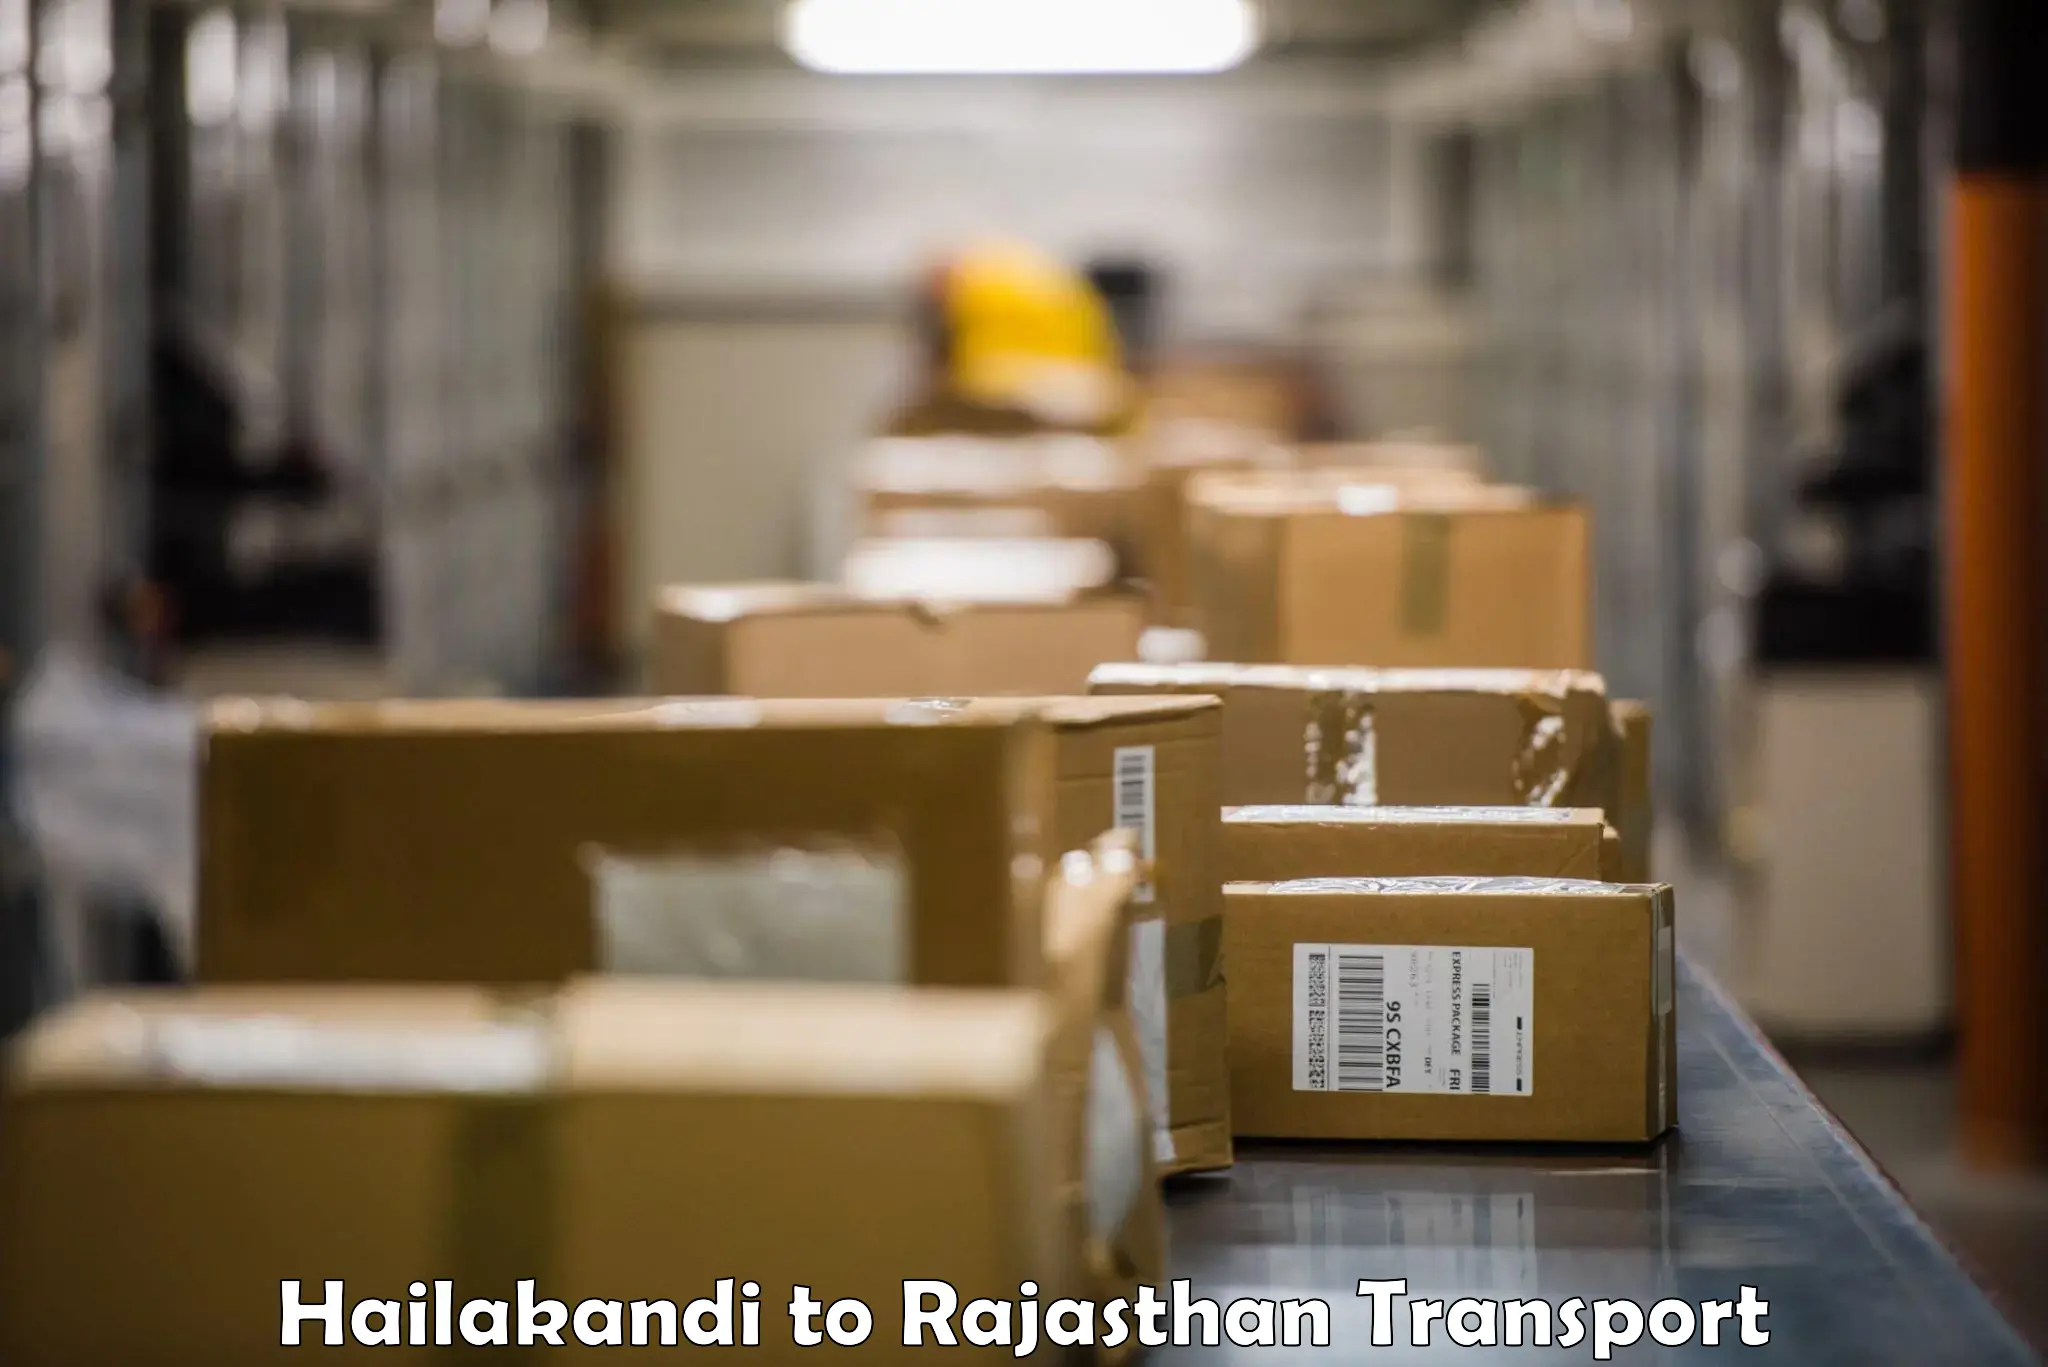 Truck transport companies in India Hailakandi to Piparcity